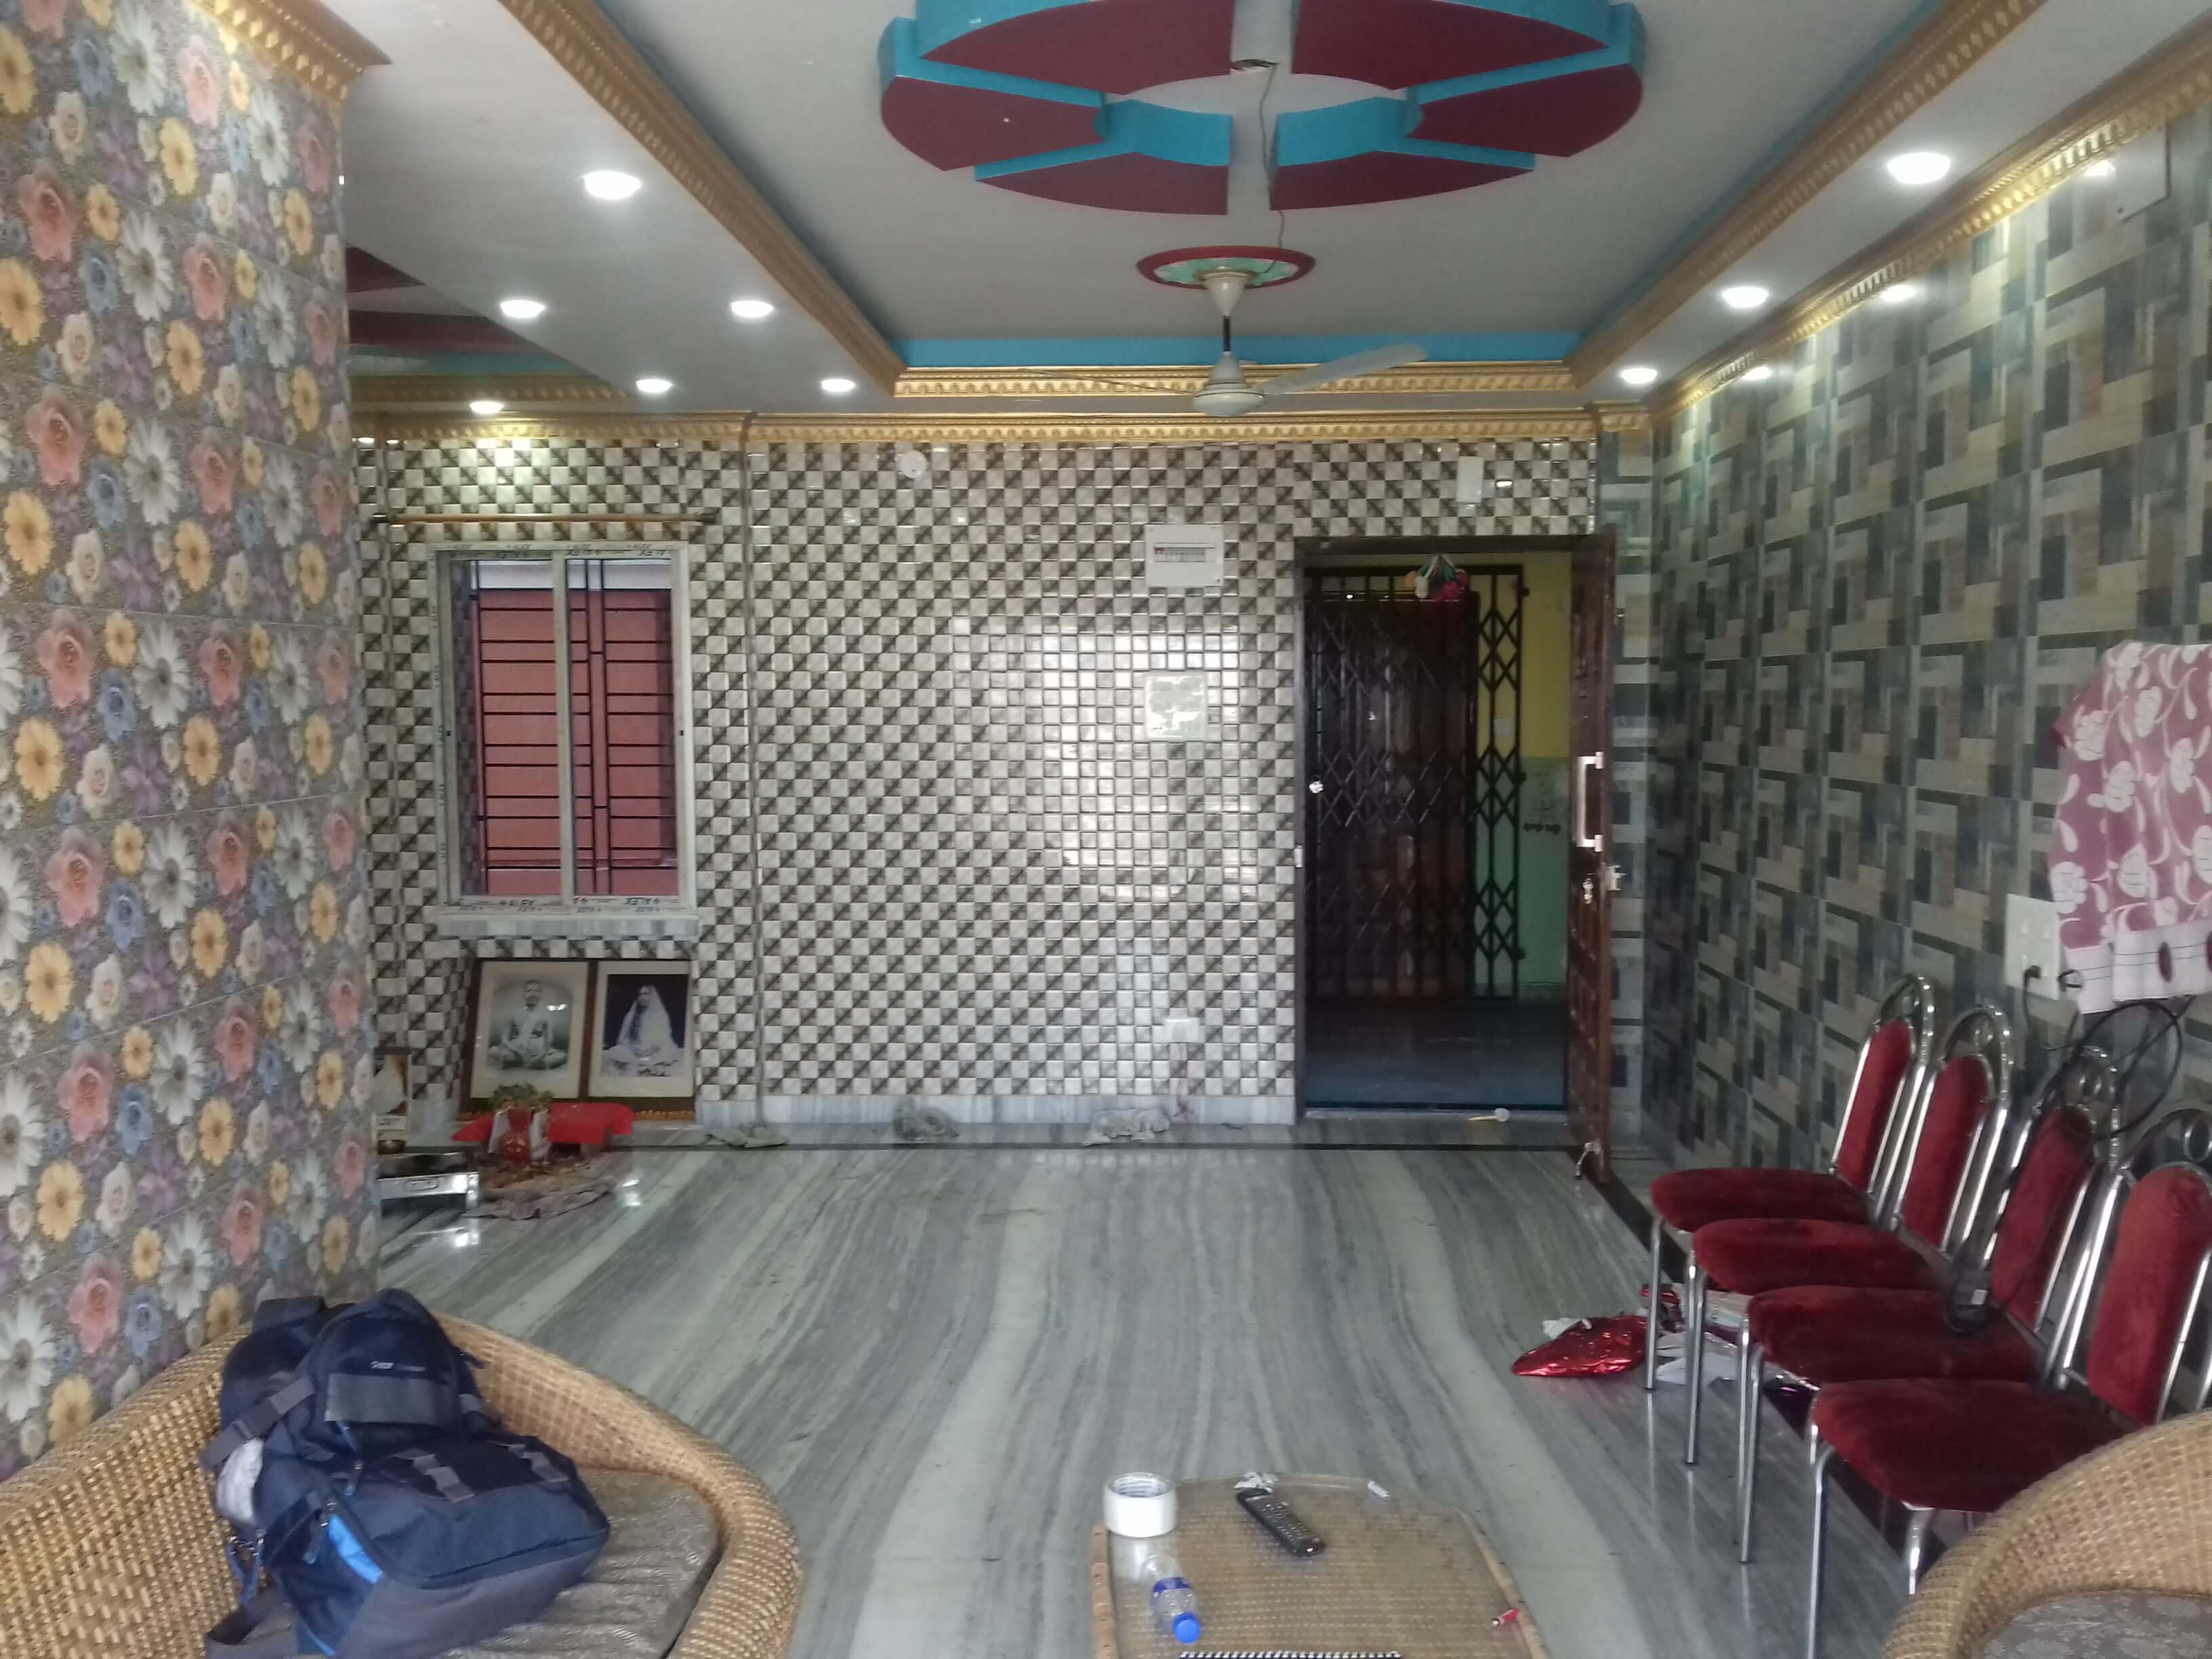 Flat For Rent in Nager Bazar Kolkata (Id: 9420)